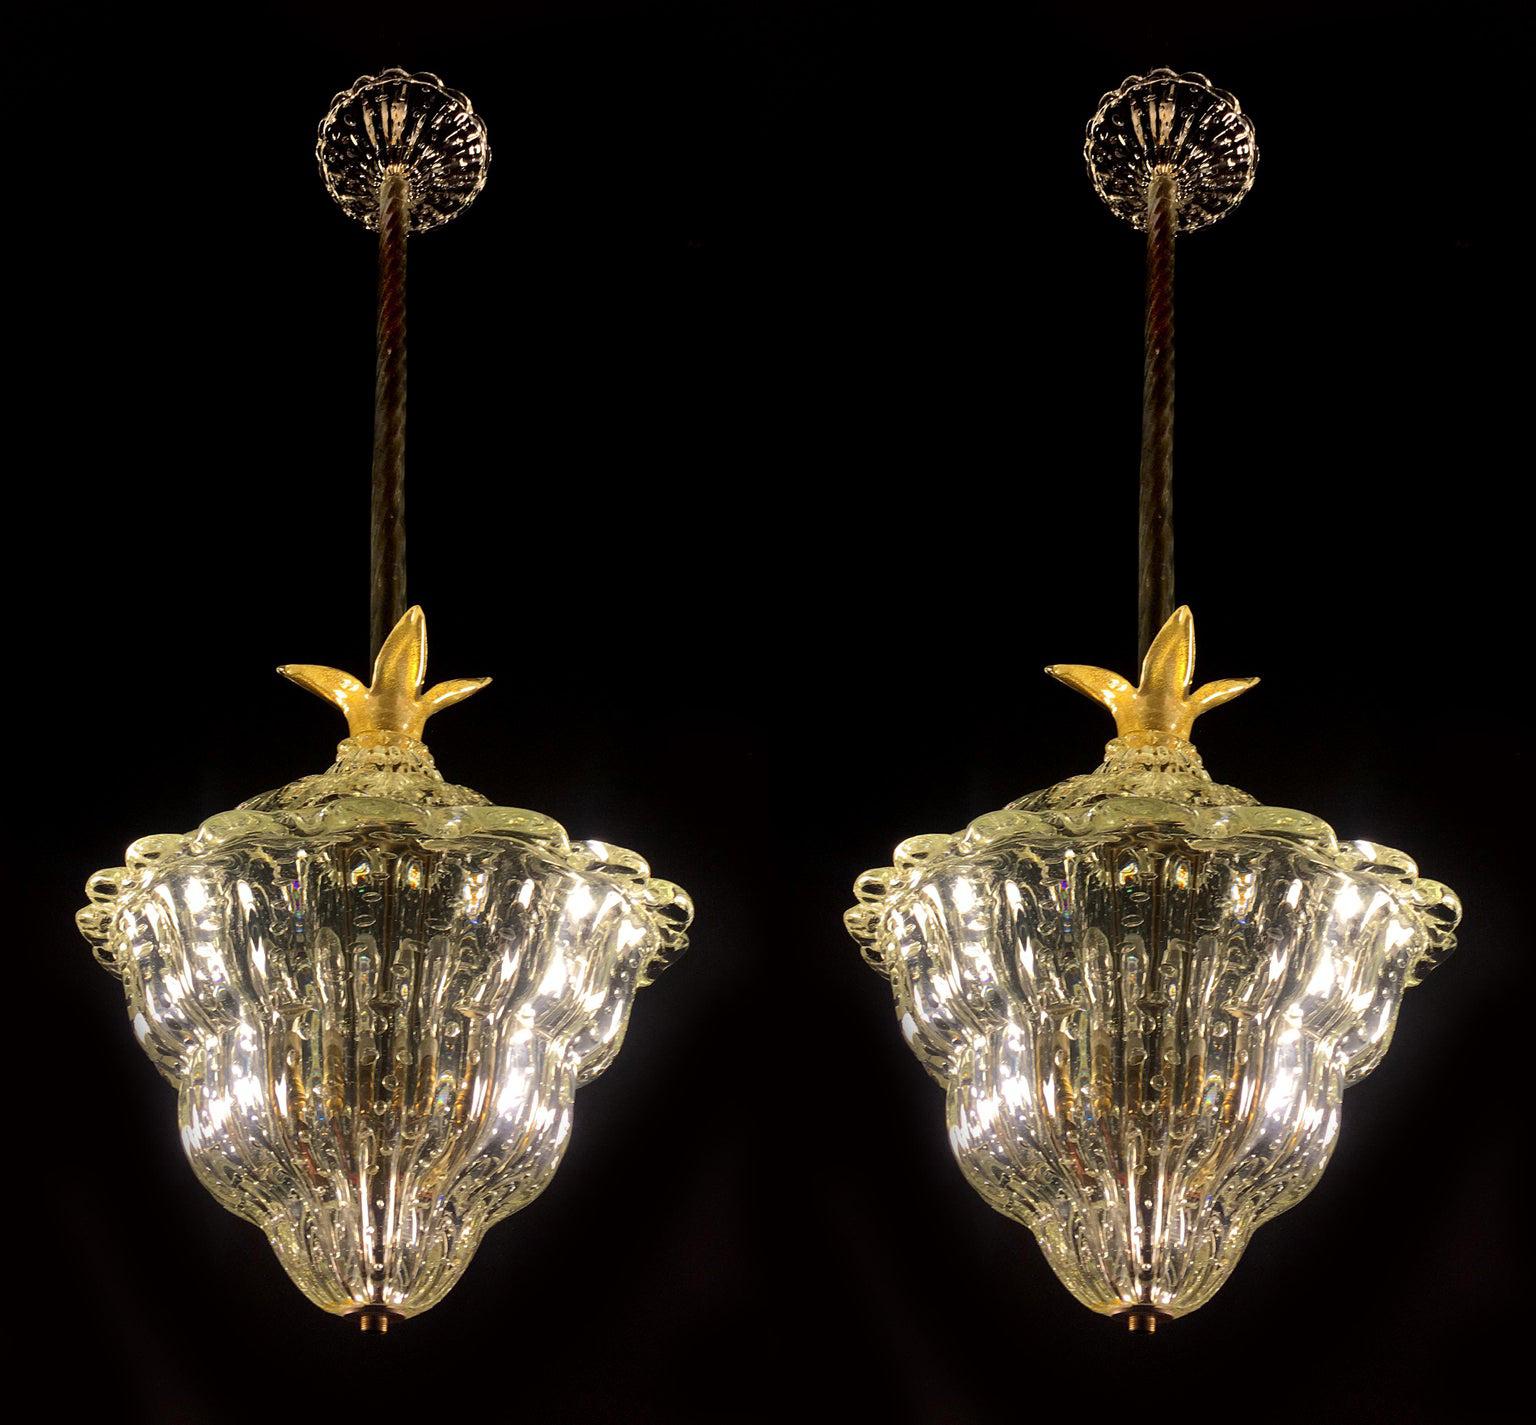 Pair of lantern of incredible beauty in massive Murano glass with inclusions of gold.

Three pieces are available.